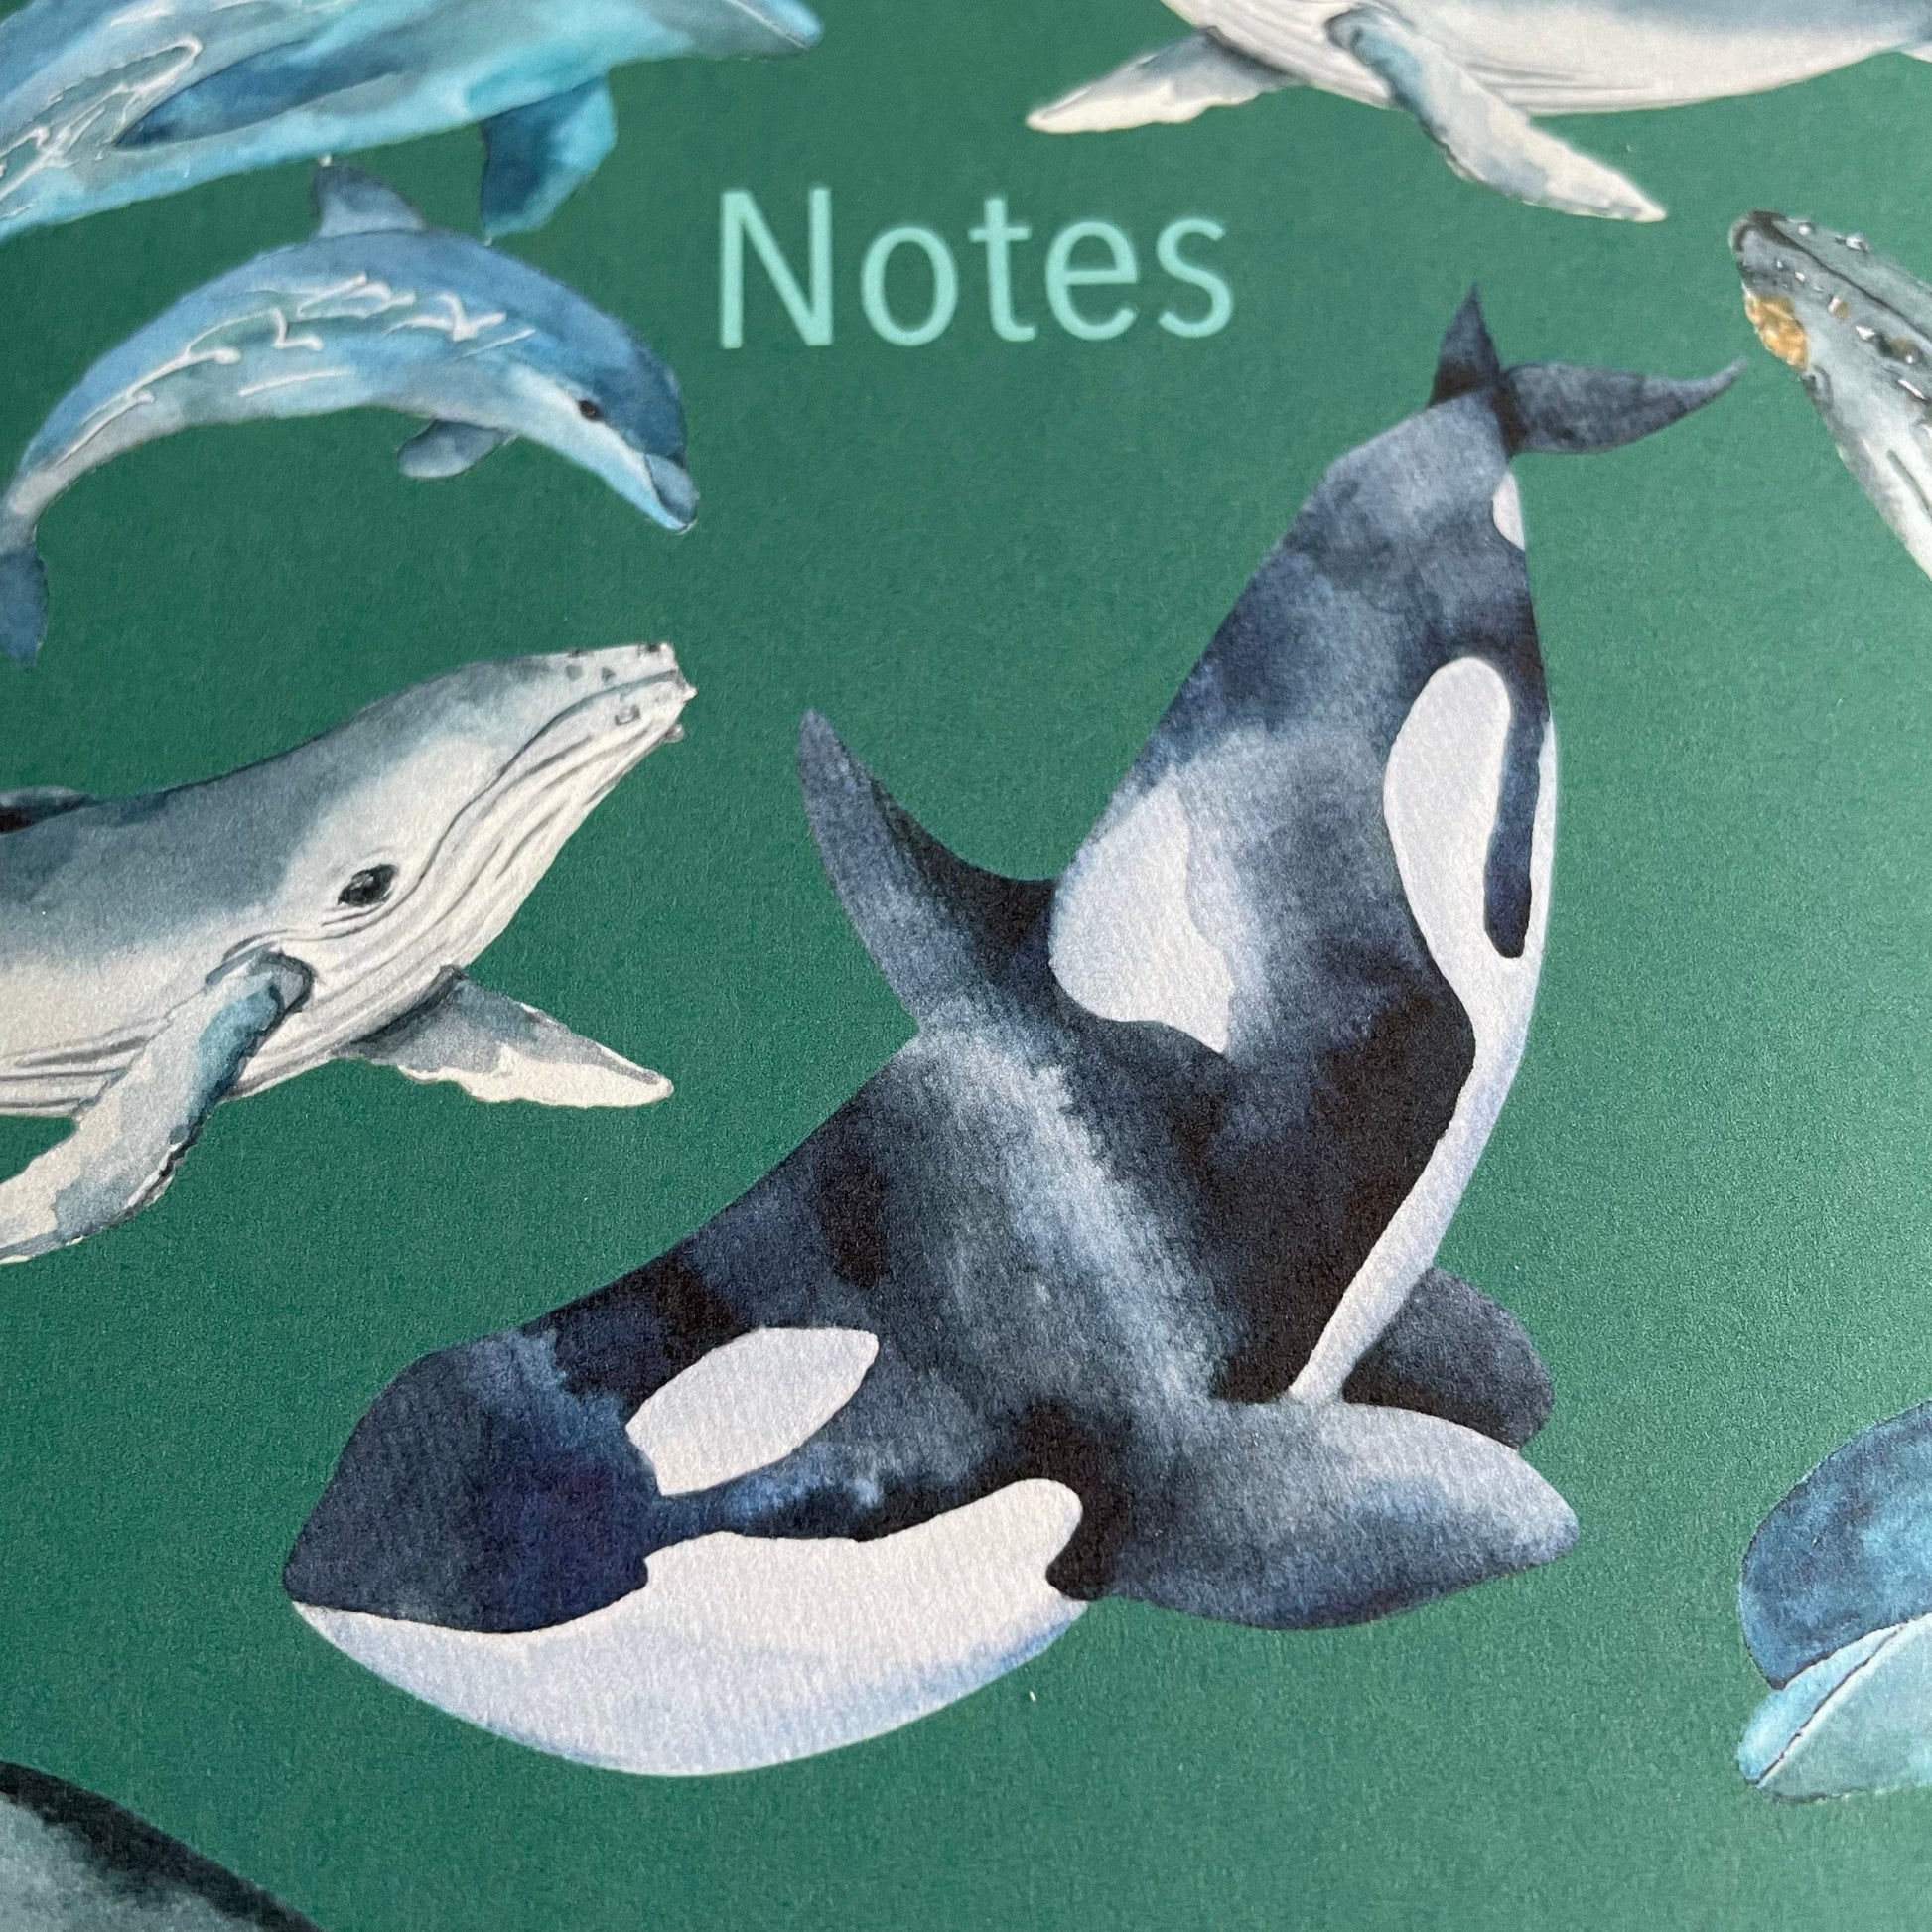 Sealife A5 lined notebook Notebook And Hope Designs   